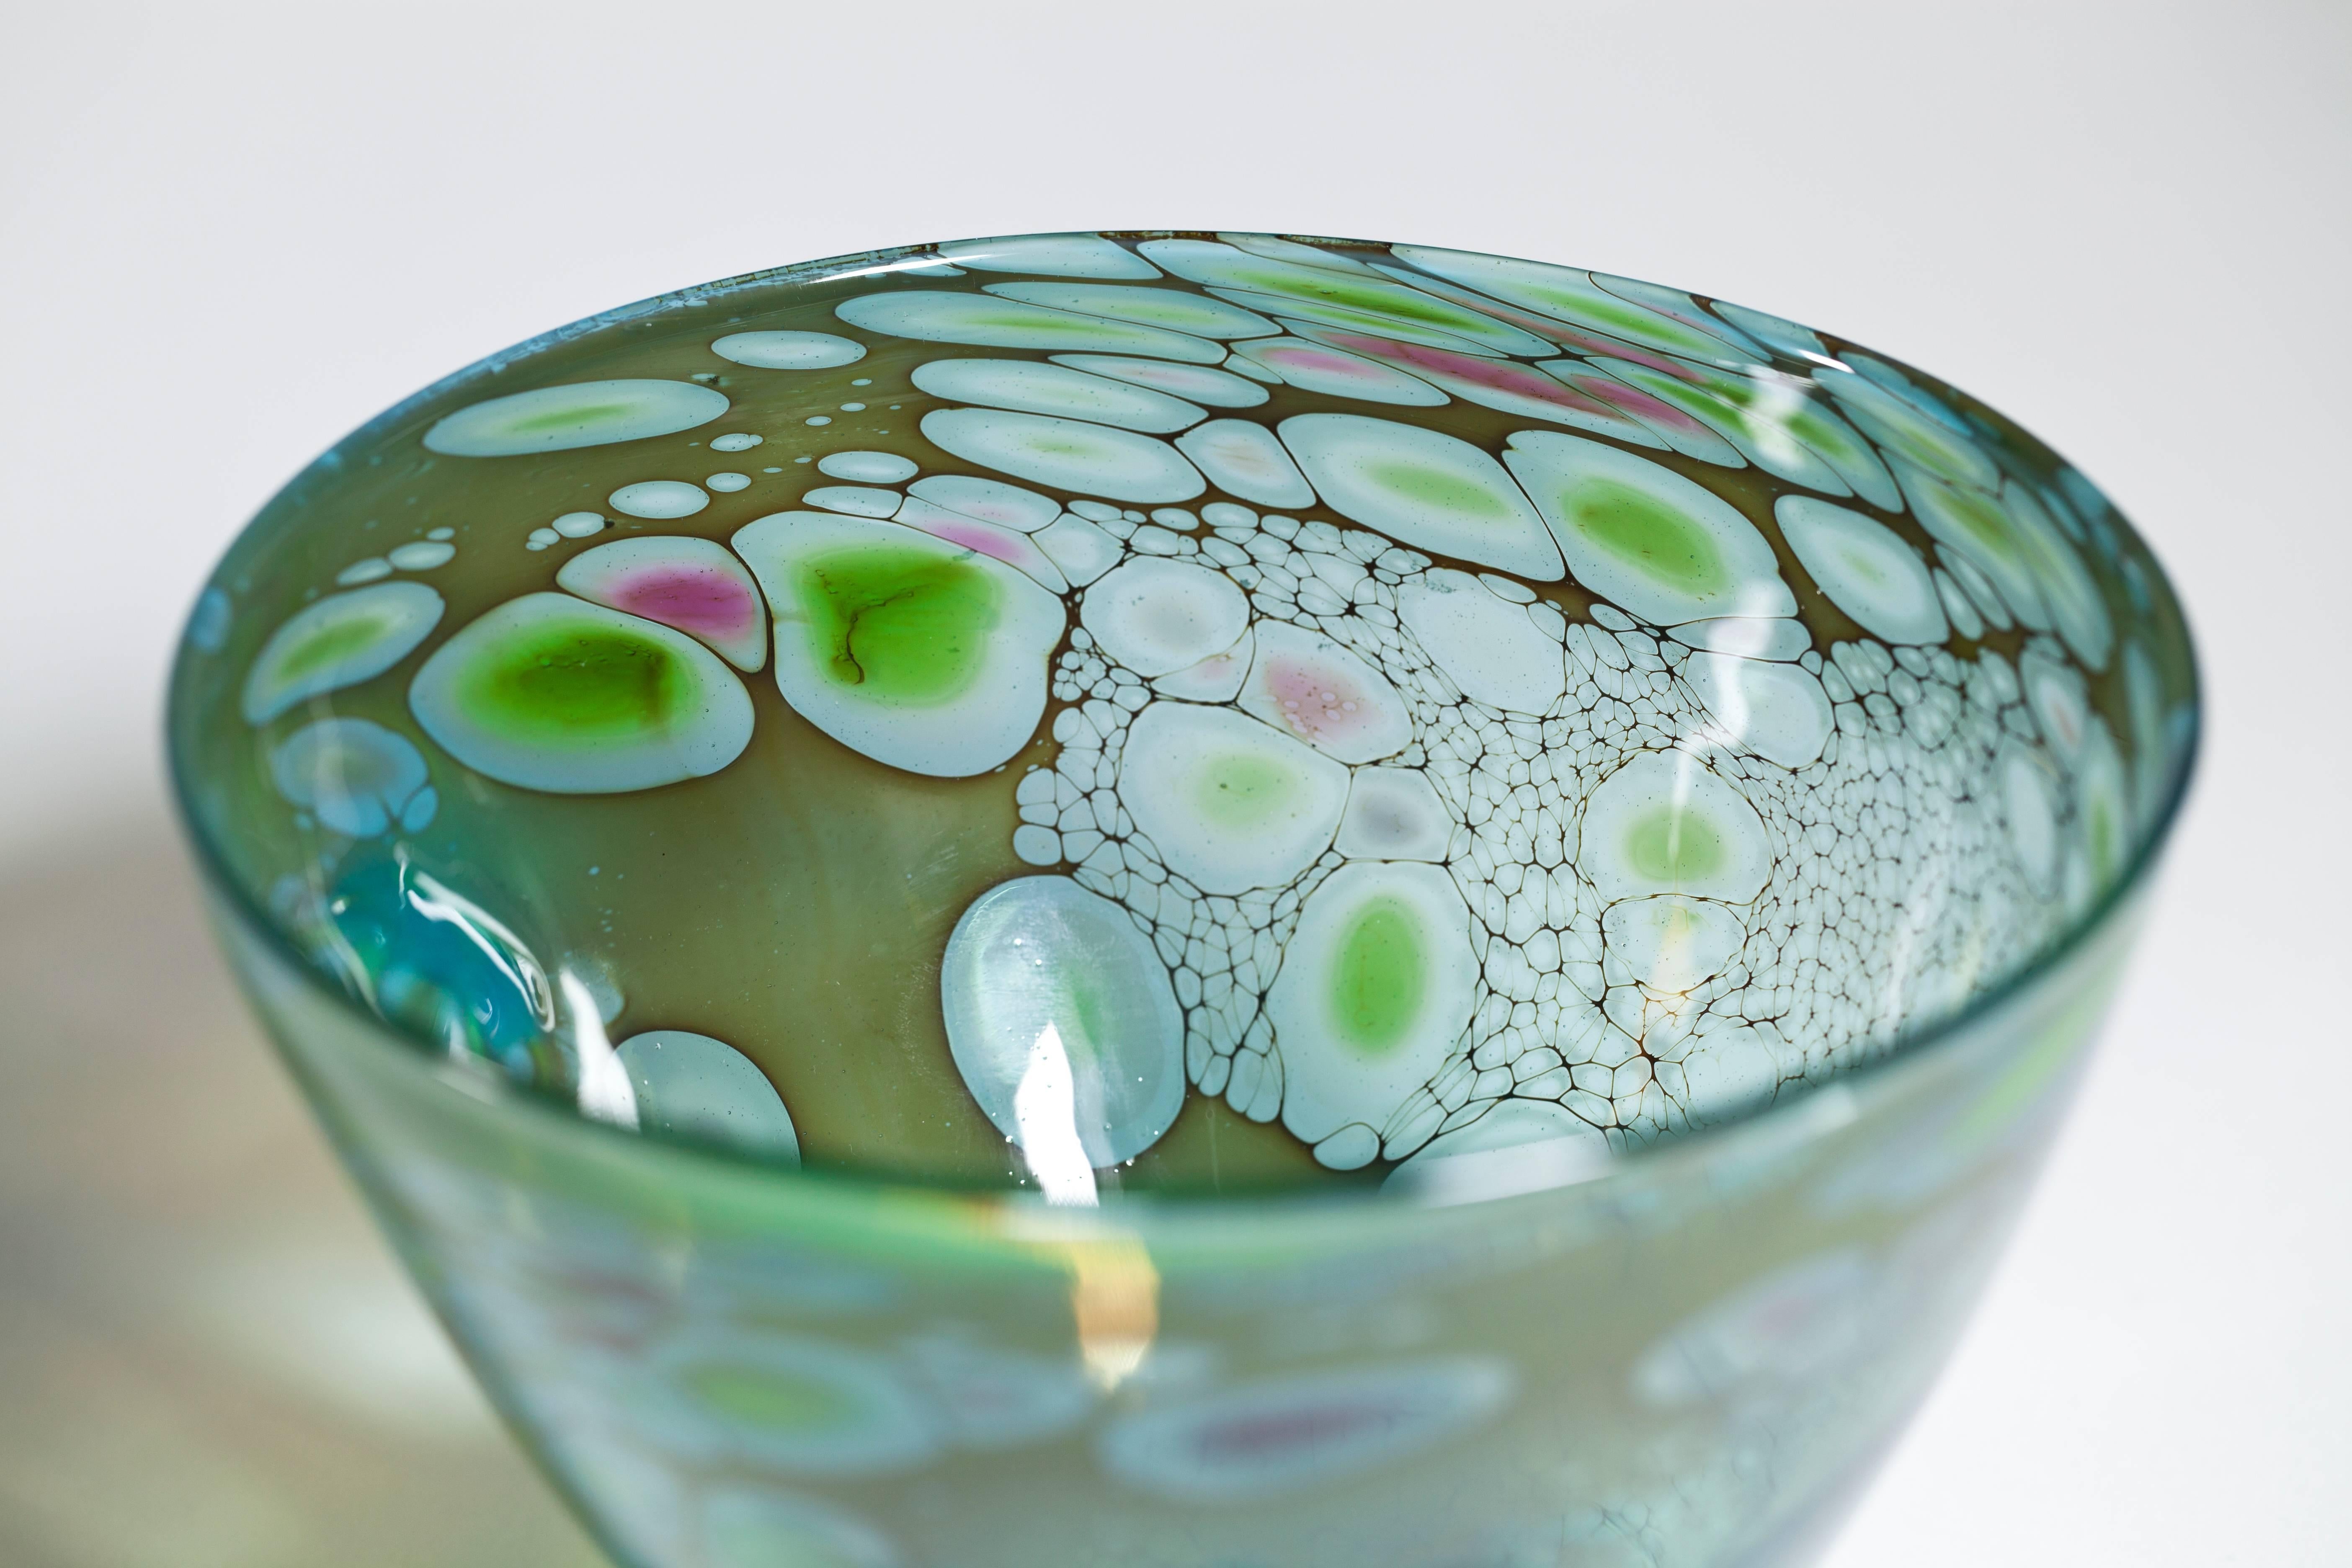 Dutch Unique Art Glass Bowl by Willem Heese, Executed by De Oude Horn